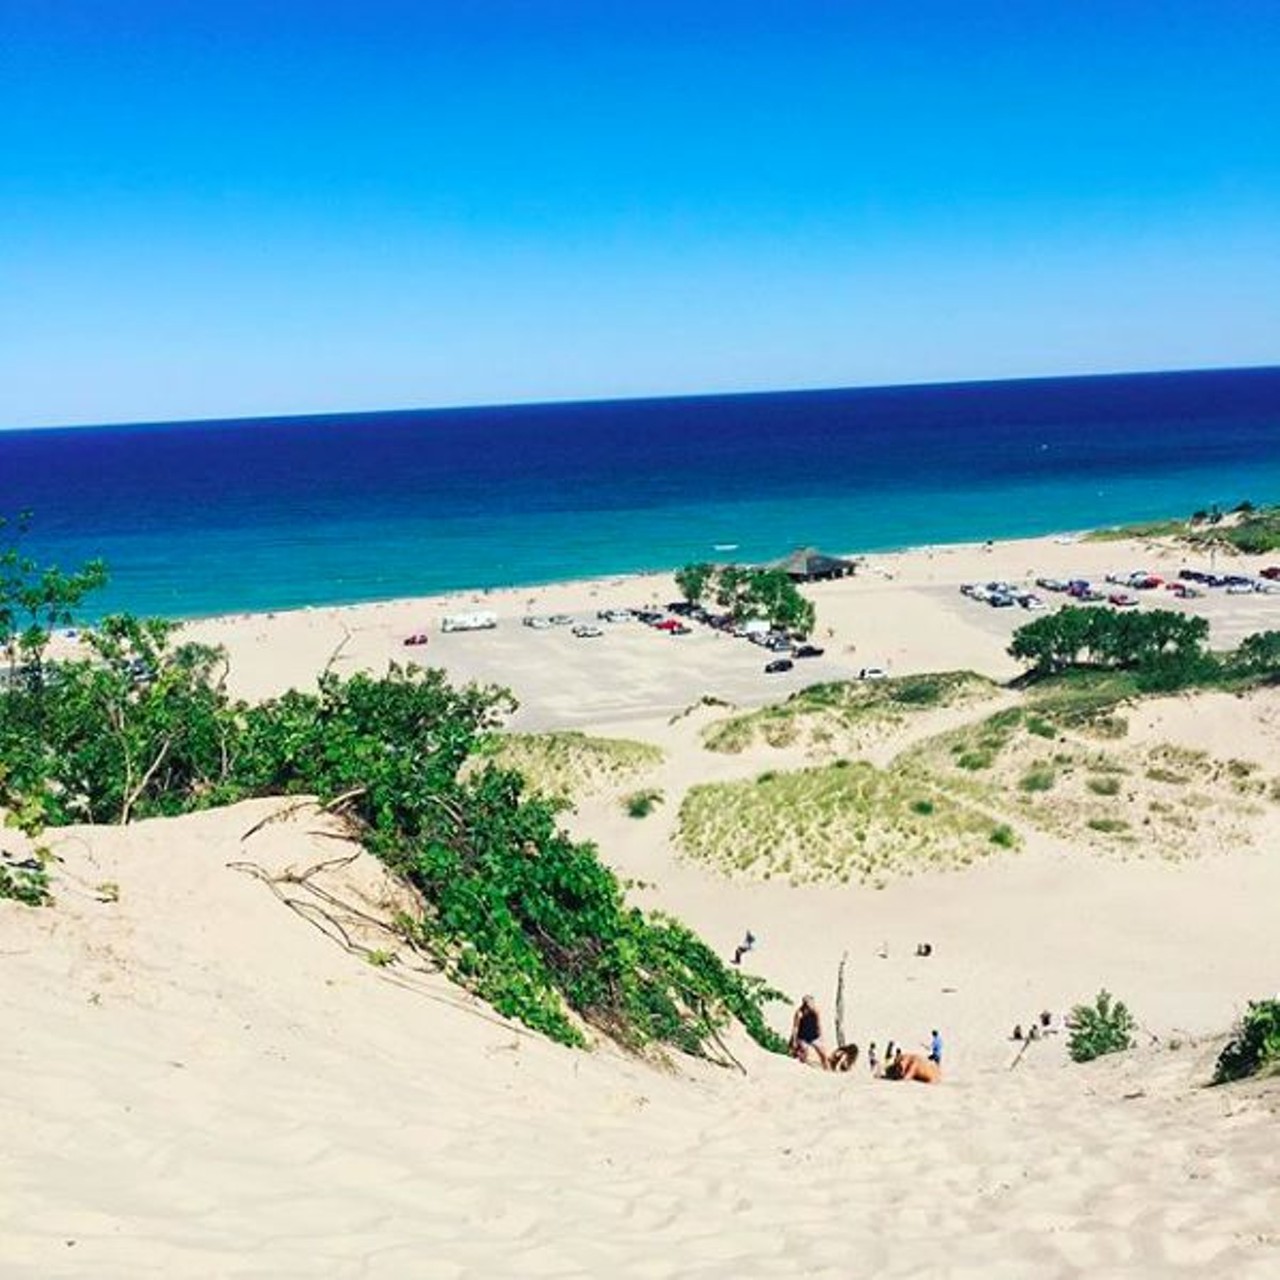 Warren Dunes State Park
Sawyer, MI
What more can you ask for than three miles of shoreline and sand dunes? Well this campground is located right at the foot of it all. The six miles of trails take you through serene natural areas to the beach and if you climb to the top of the dunes and you are rewarded with panoramic views of the lake. 
Photo via IG user @garaleehundley